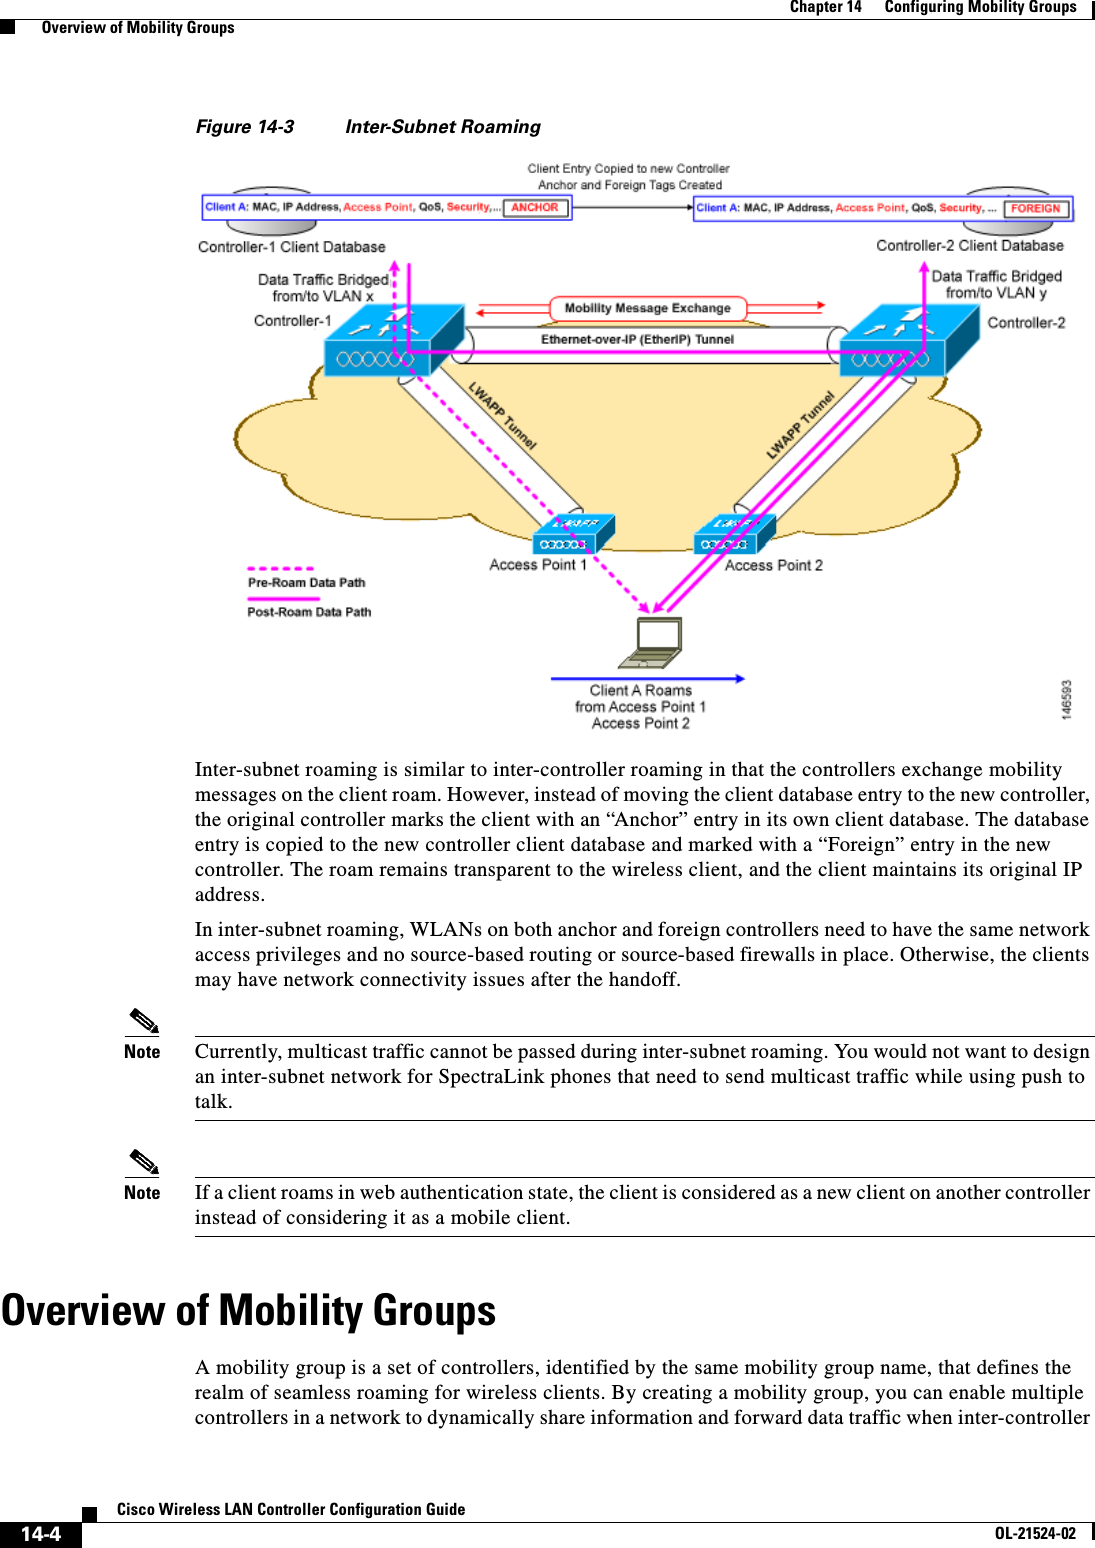  14-4Cisco Wireless LAN Controller Configuration GuideOL-21524-02Chapter 14      Configuring Mobility Groups  Overview of Mobility GroupsFigure 14-3 Inter-Subnet RoamingInter-subnet roaming is similar to inter-controller roaming in that the controllers exchange mobility messages on the client roam. However, instead of moving the client database entry to the new controller, the original controller marks the client with an “Anchor” entry in its own client database. The database entry is copied to the new controller client database and marked with a “Foreign” entry in the new controller. The roam remains transparent to the wireless client, and the client maintains its original IP address.In inter-subnet roaming, WLANs on both anchor and foreign controllers need to have the same network access privileges and no source-based routing or source-based firewalls in place. Otherwise, the clients may have network connectivity issues after the handoff.Note Currently, multicast traffic cannot be passed during inter-subnet roaming. You would not want to design an inter-subnet network for SpectraLink phones that need to send multicast traffic while using push to talk.Note If a client roams in web authentication state, the client is considered as a new client on another controller instead of considering it as a mobile client.Overview of Mobility GroupsA mobility group is a set of controllers, identified by the same mobility group name, that defines the realm of seamless roaming for wireless clients. By creating a mobility group, you can enable multiple controllers in a network to dynamically share information and forward data traffic when inter-controller 